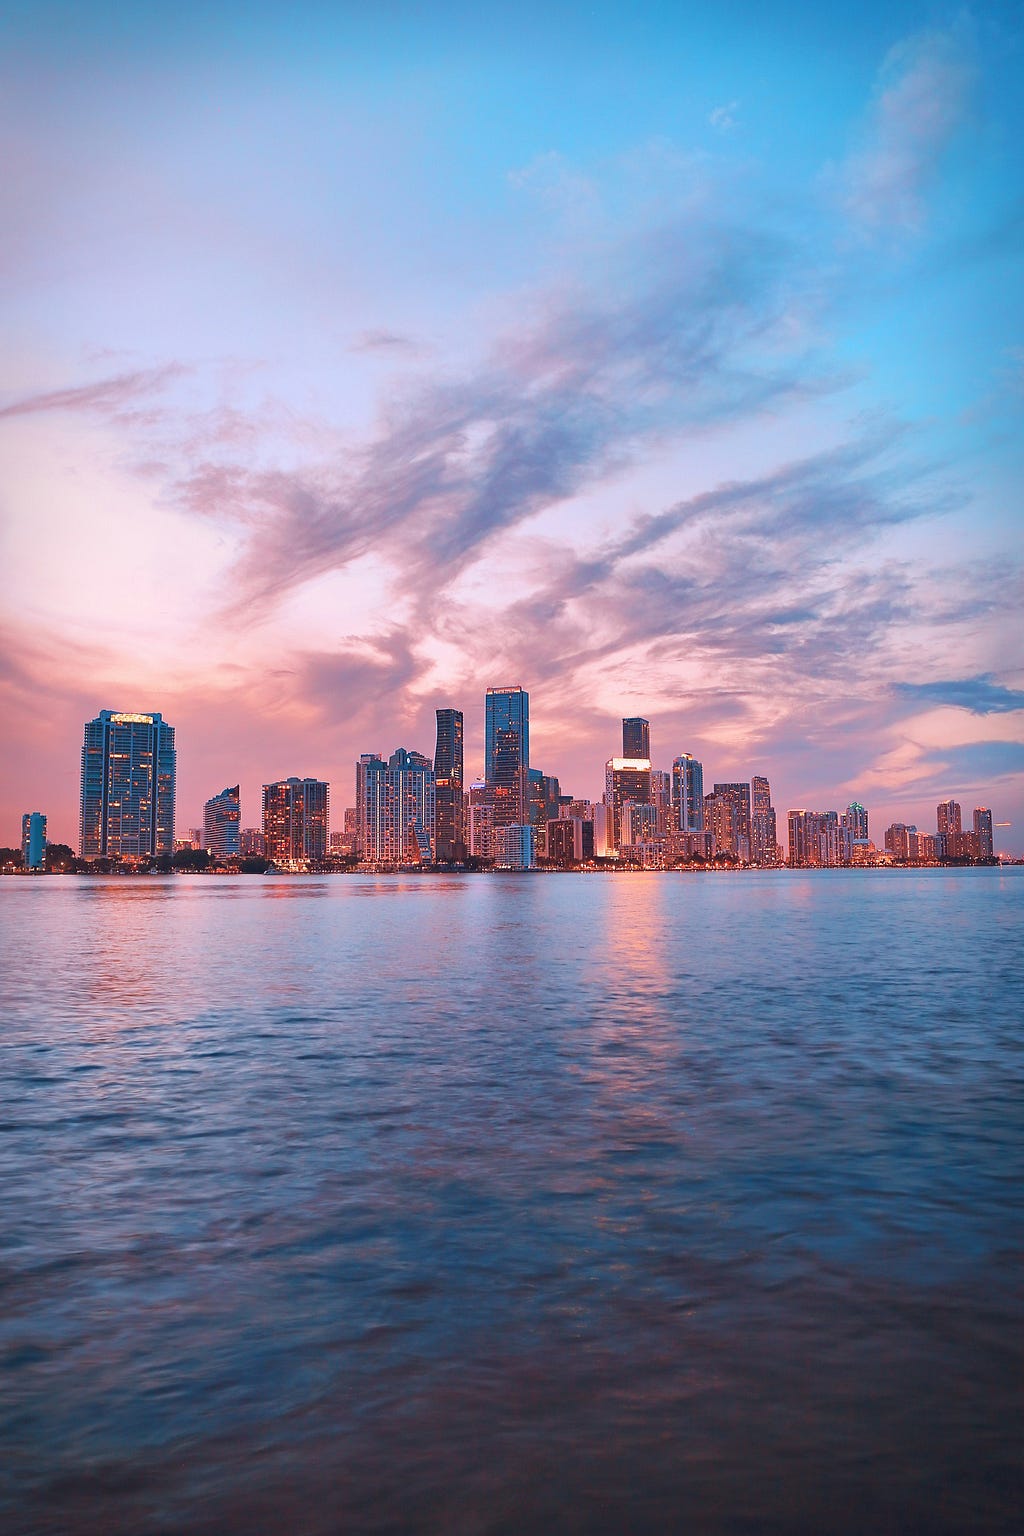 The waterfront skyline of Miami as the sunlight  fades away.